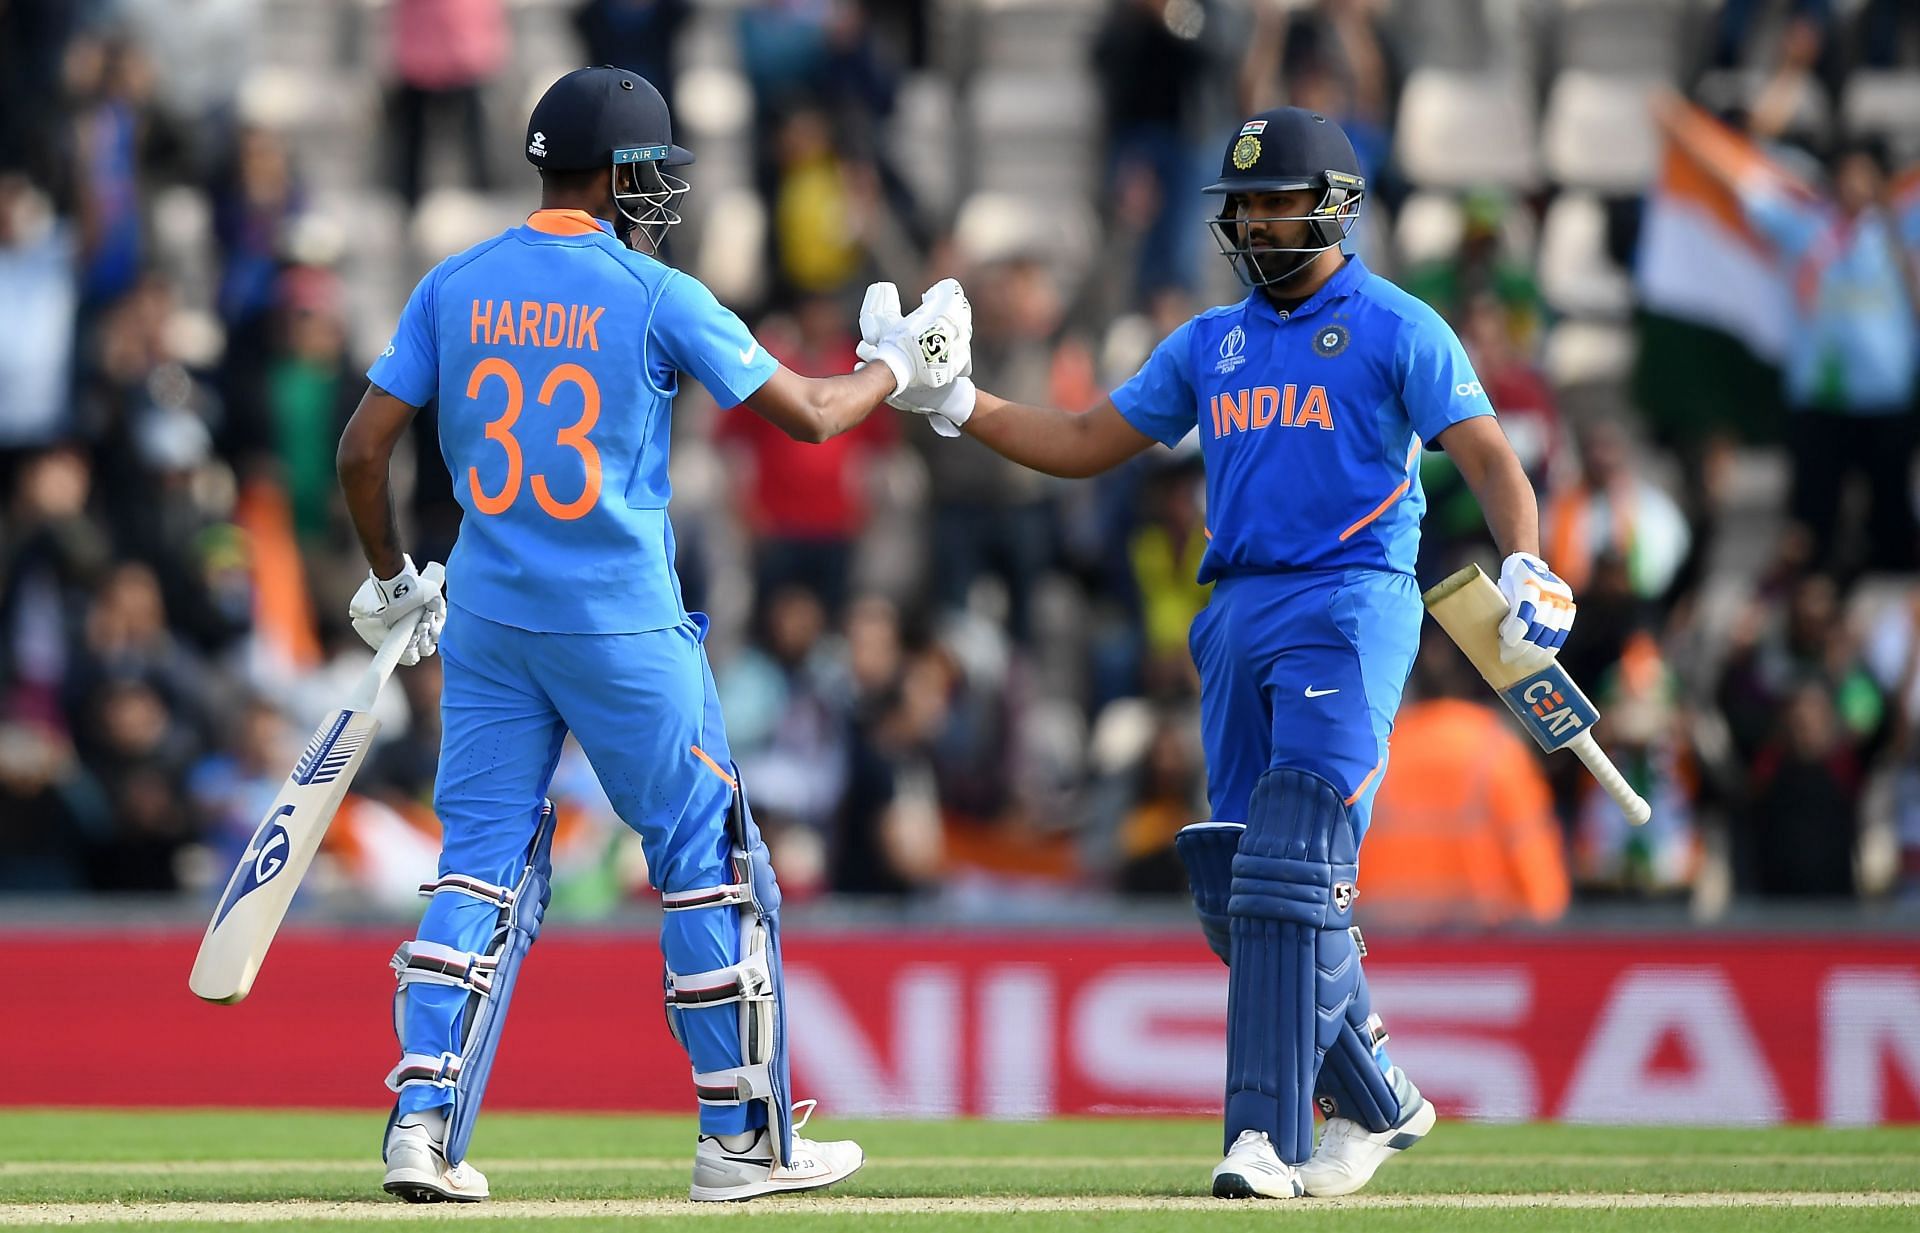 South Africa v India - ICC Cricket World Cup 2019 (Image: Getty)